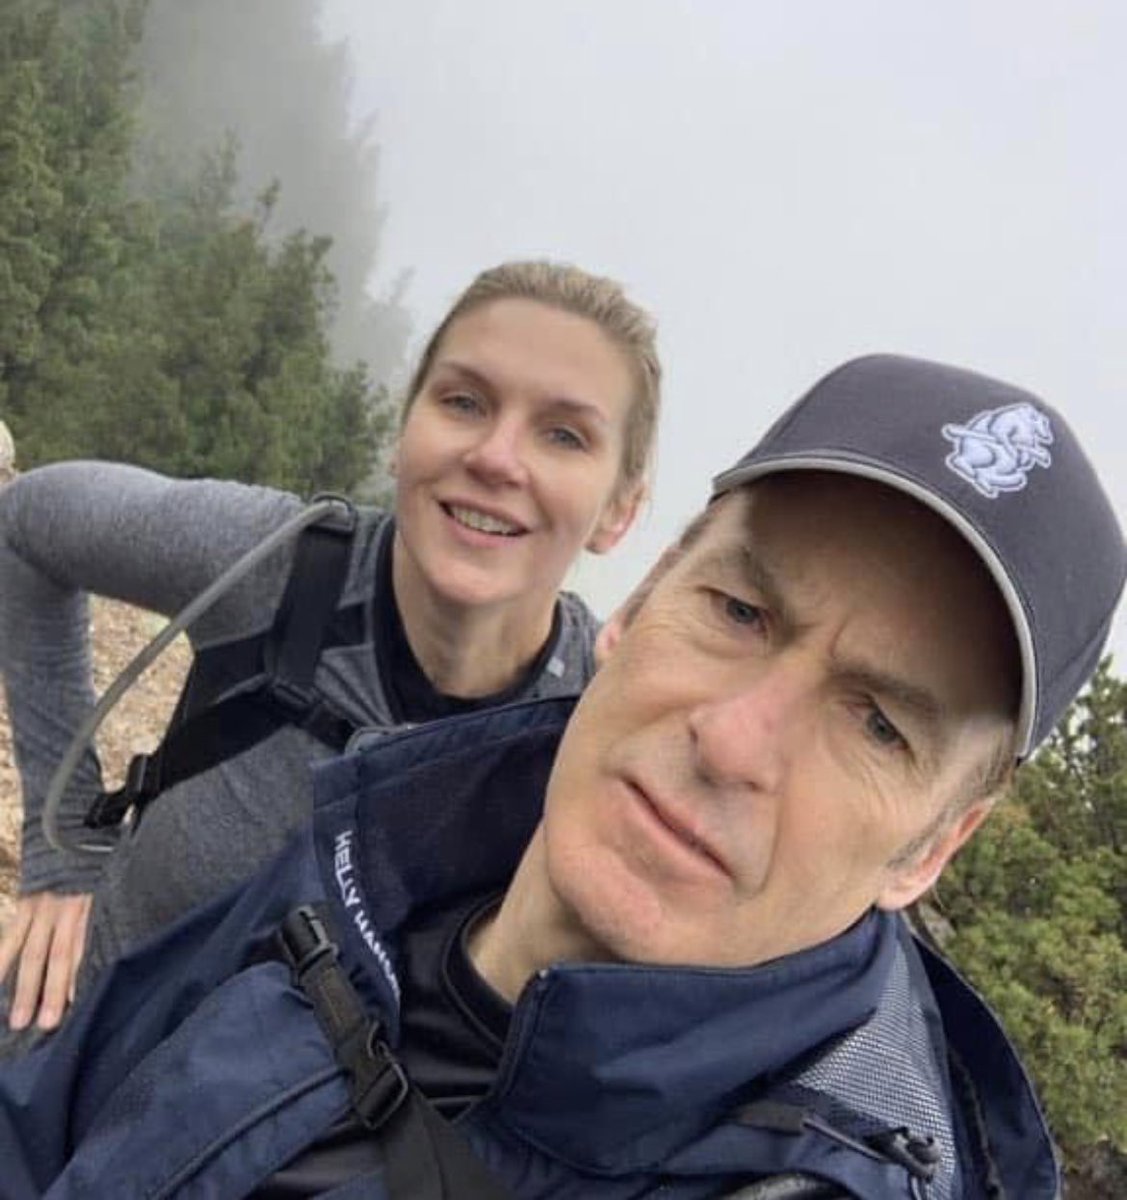 Actually, Jimmy escaped prison and he and Kim are hiking the Pacific Crest Trail #BetterCallSaulFinale